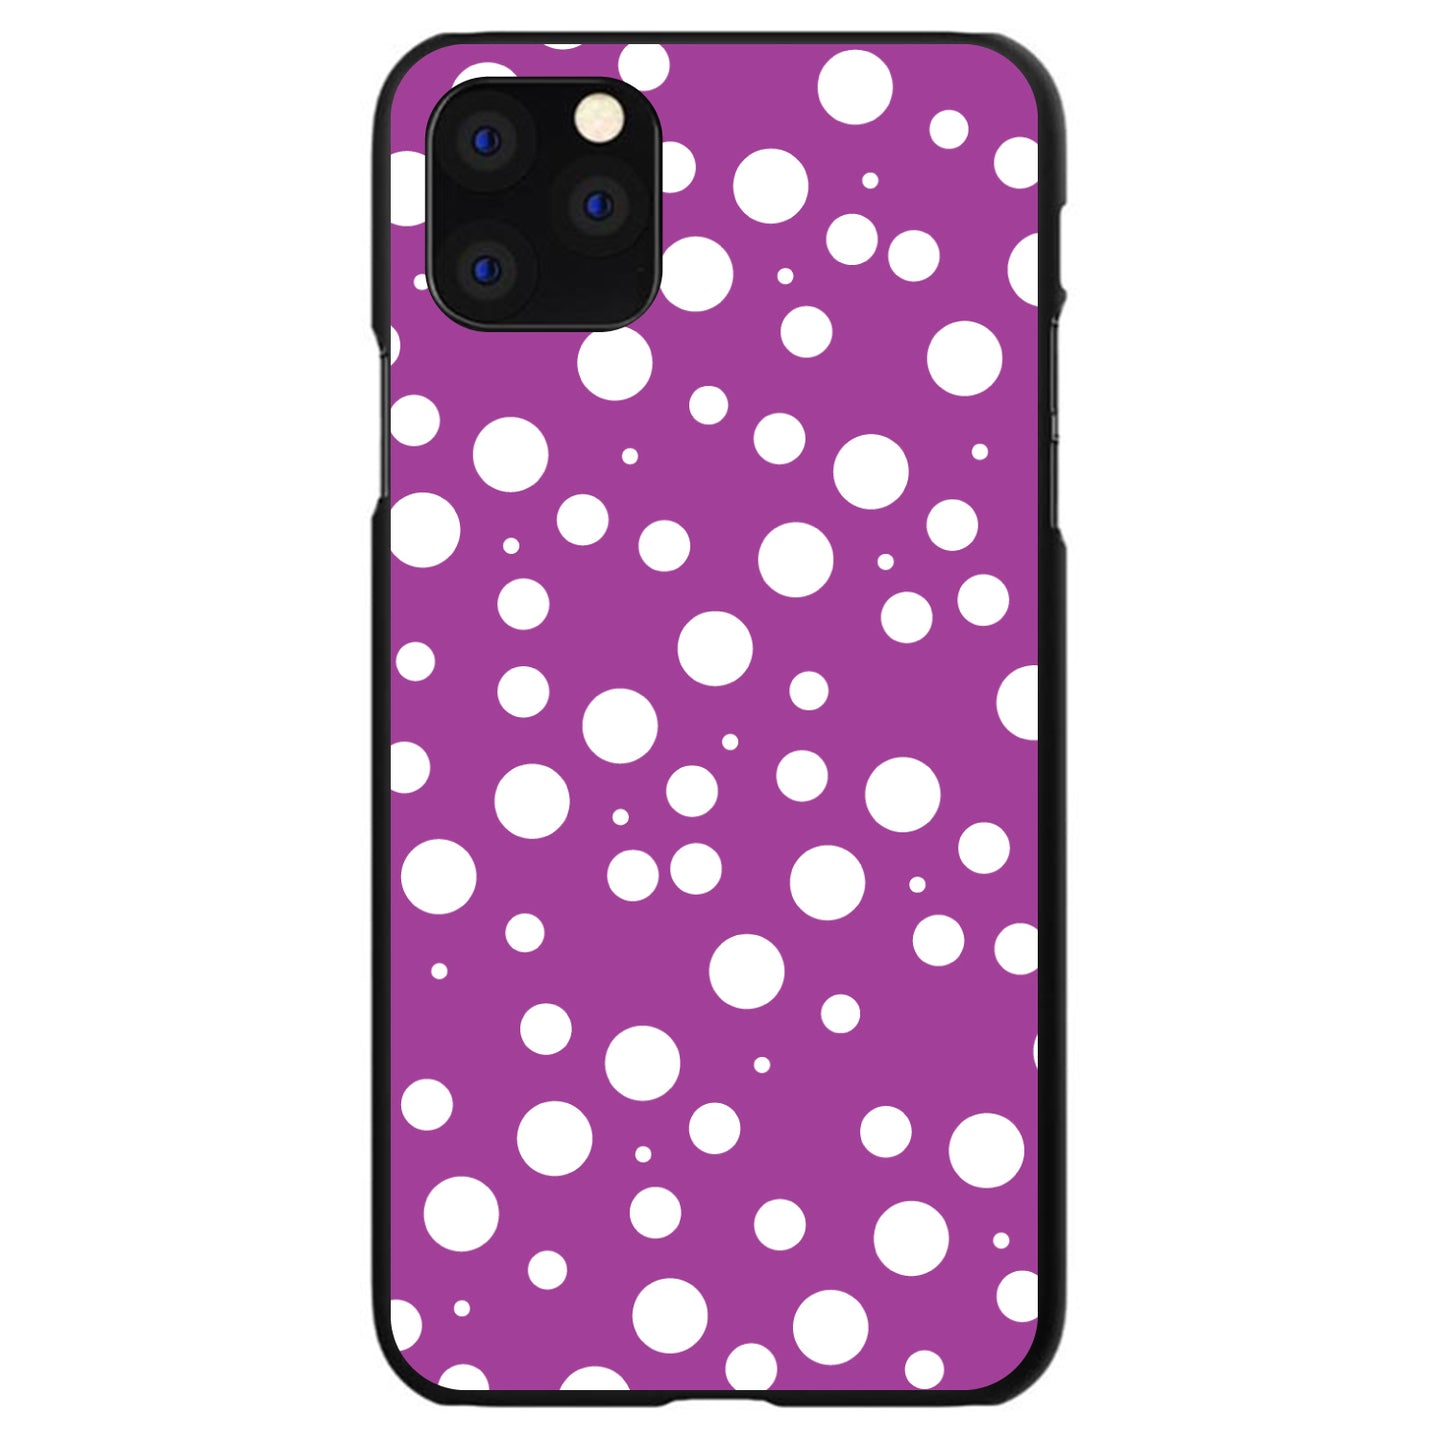 DistinctInk® Hard Plastic Snap-On Case for Apple iPhone or Samsung Galaxy - Fuchsia White Bubbles Polka Dots